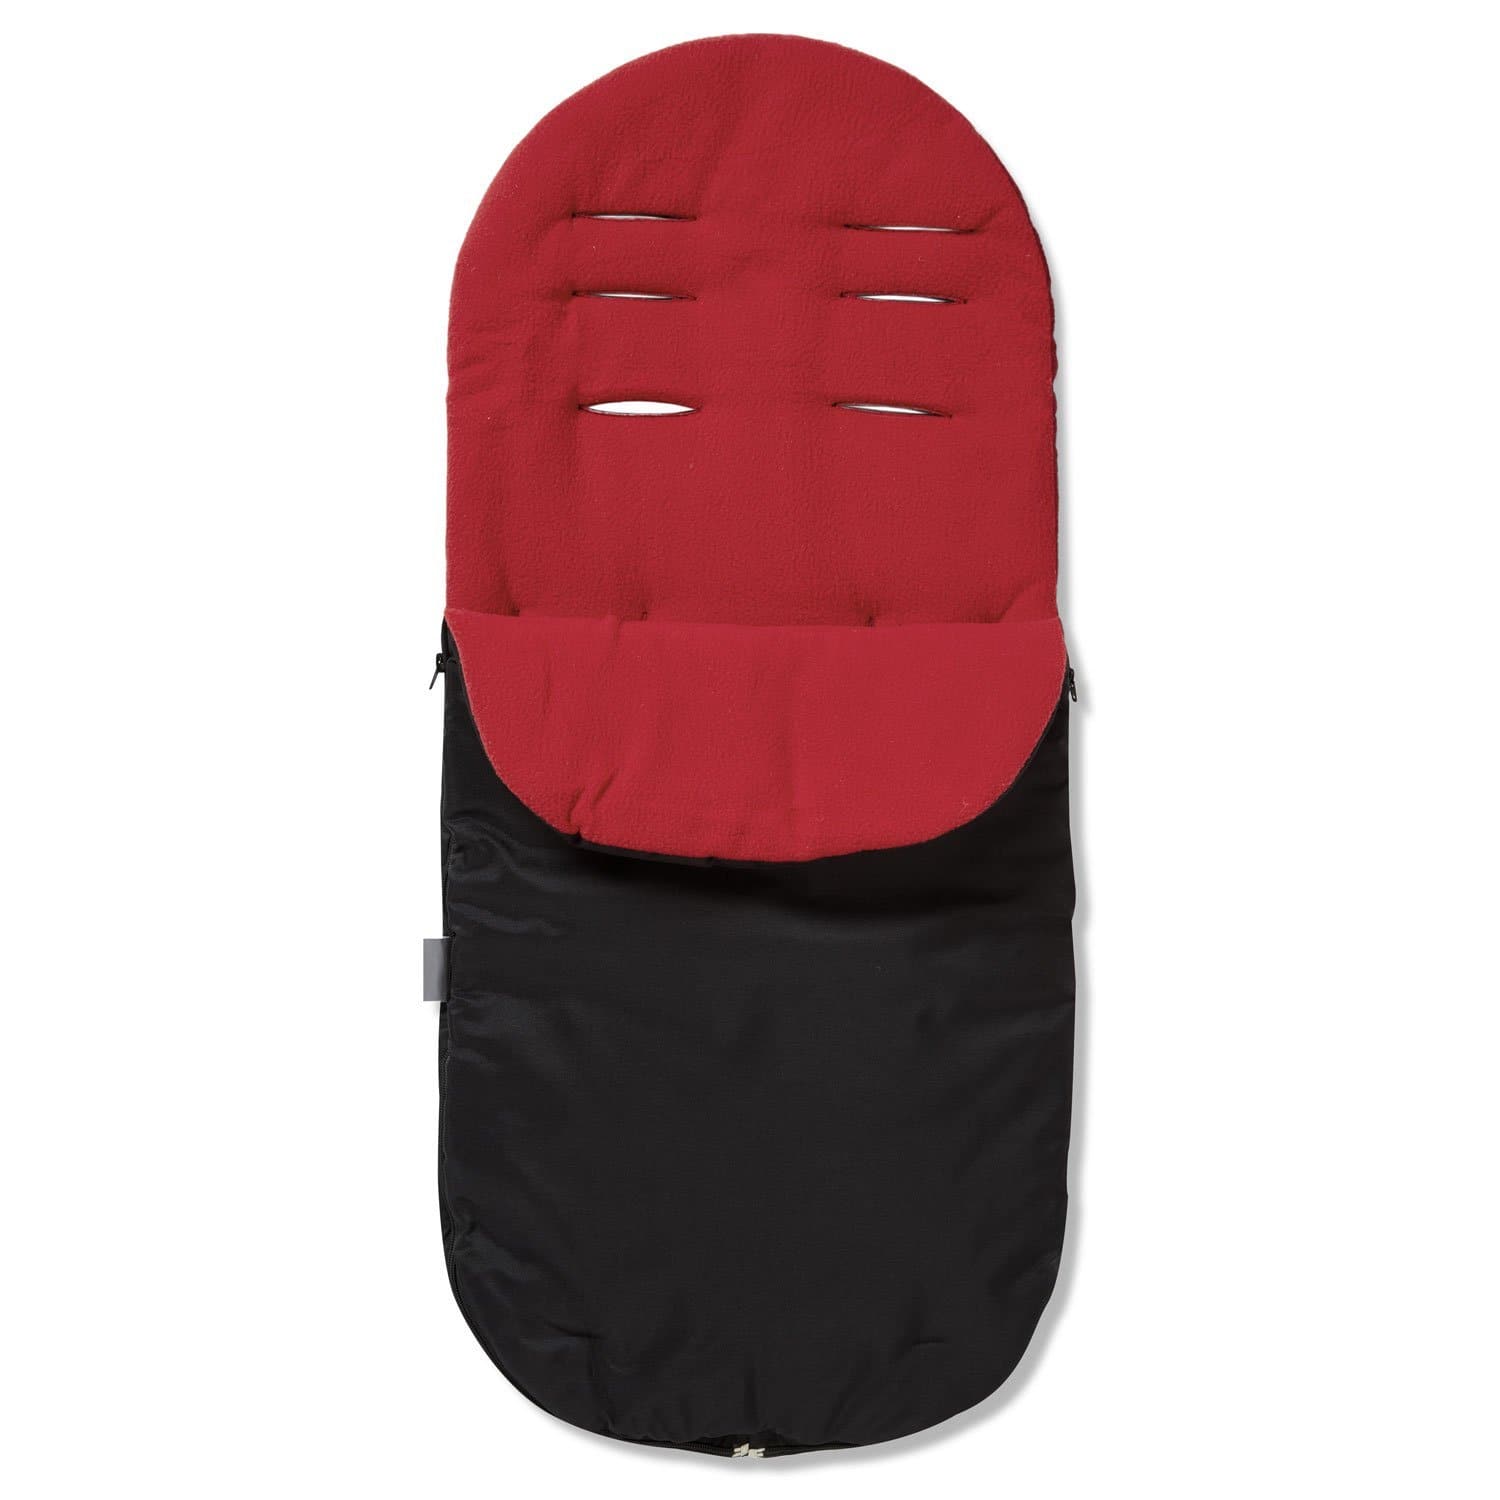 Footmuff / Cosy Toes Compatible with Baby Trend - Red / Fits All Models | For Your Little One